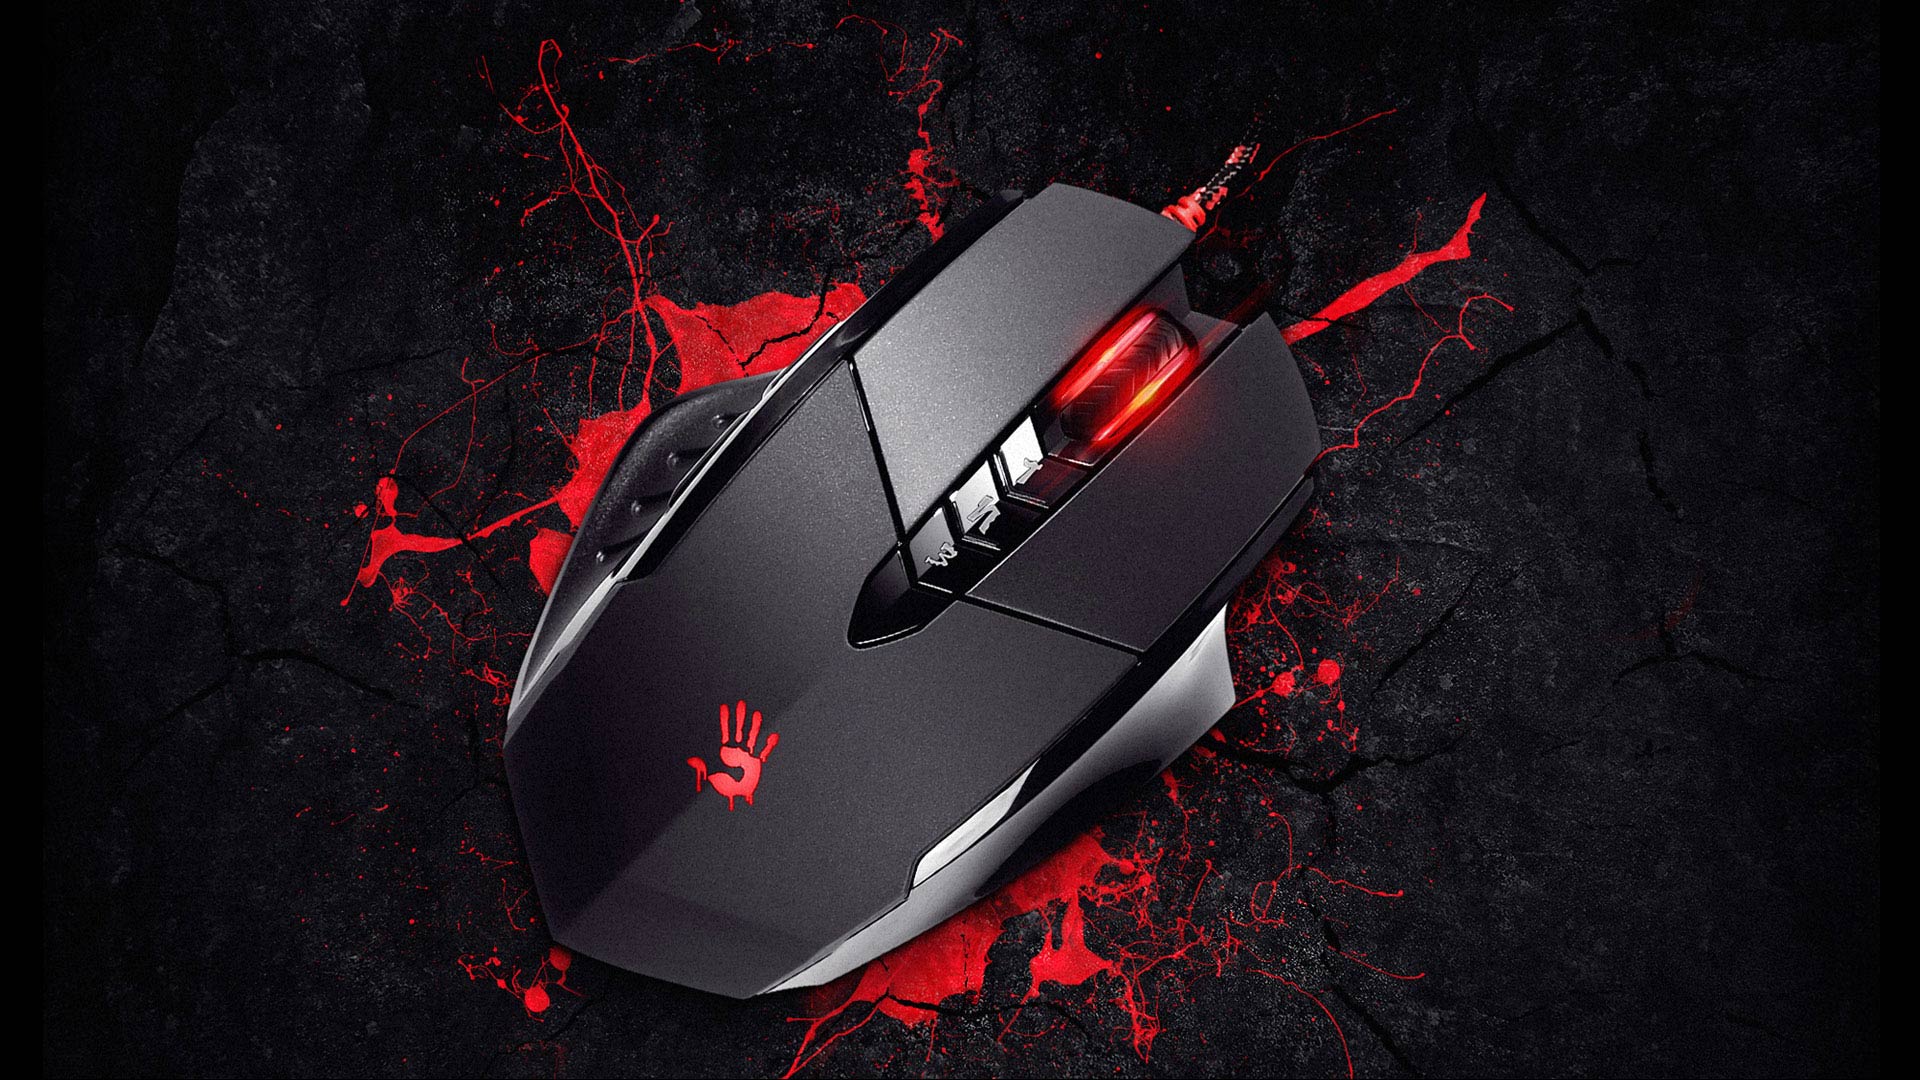 A4tech V7M GAMING MOUSE%20(3)